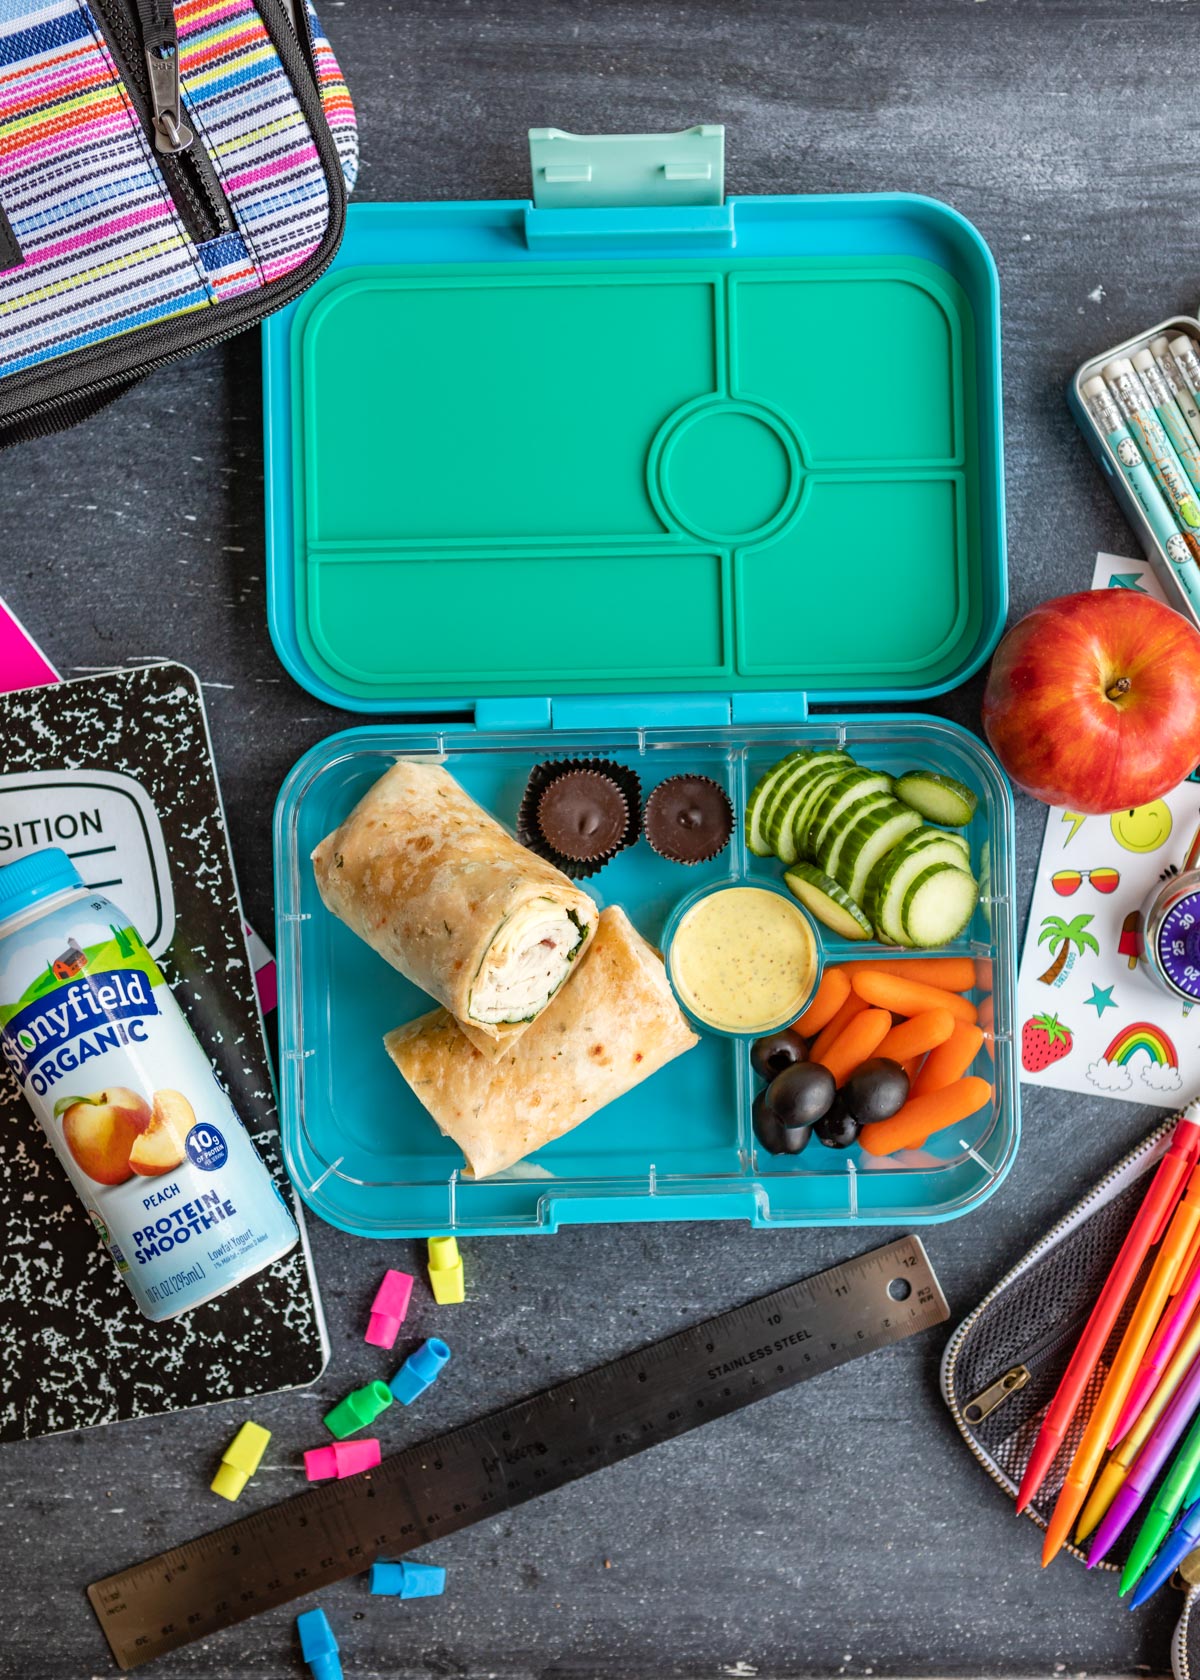 Stonyfield Kids | Organic | Three Lunch Box Ideas for Three Age Groups — from Pre-K through 6th Grade featured by popular design and mom blogger Design Mom